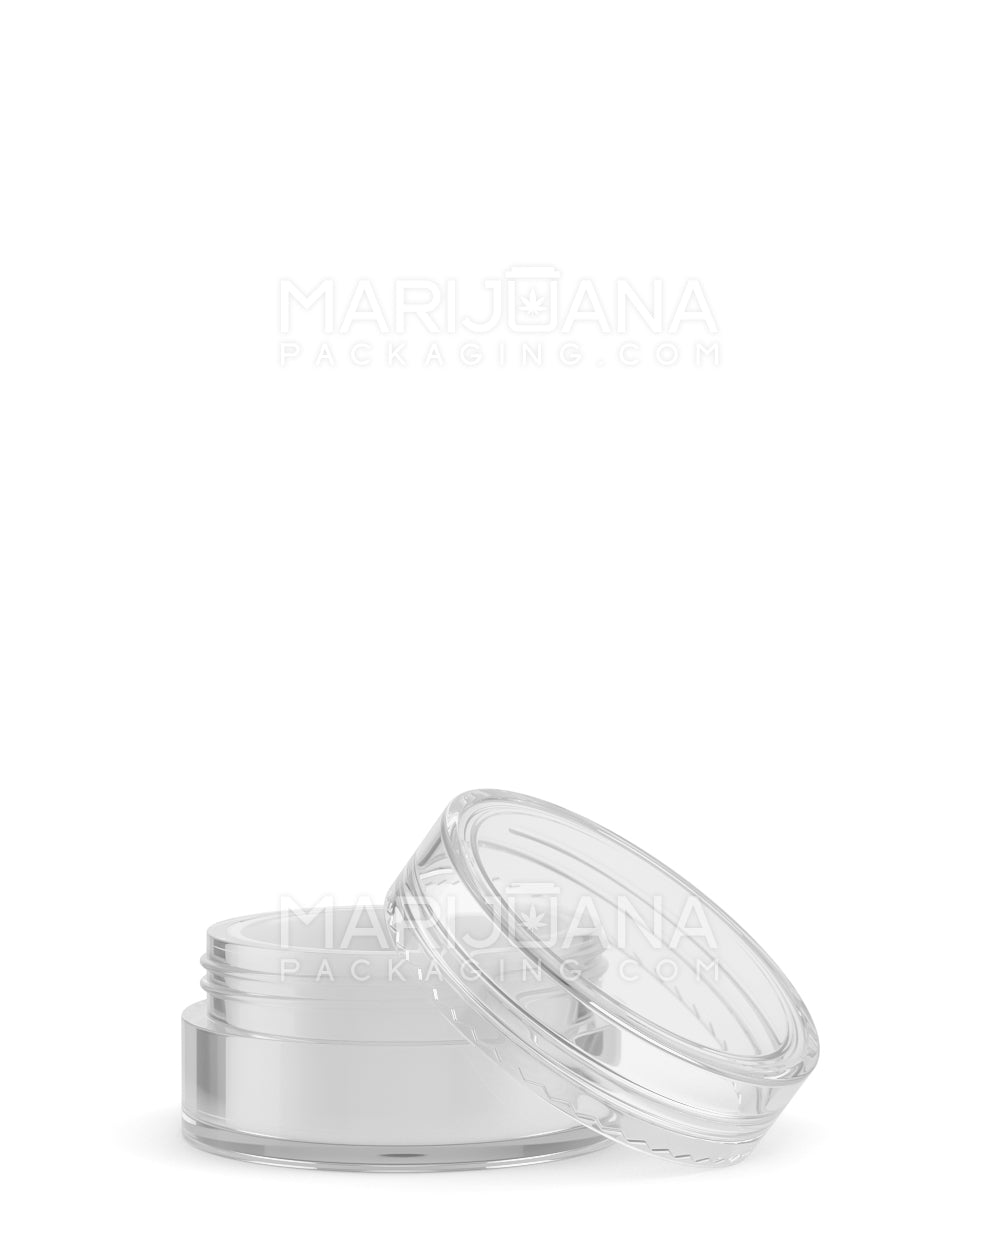 Clear Concentrate Containers w/ Screw Top Cap & White Silicone Insert | 10mL - Plastic | Sample - 1